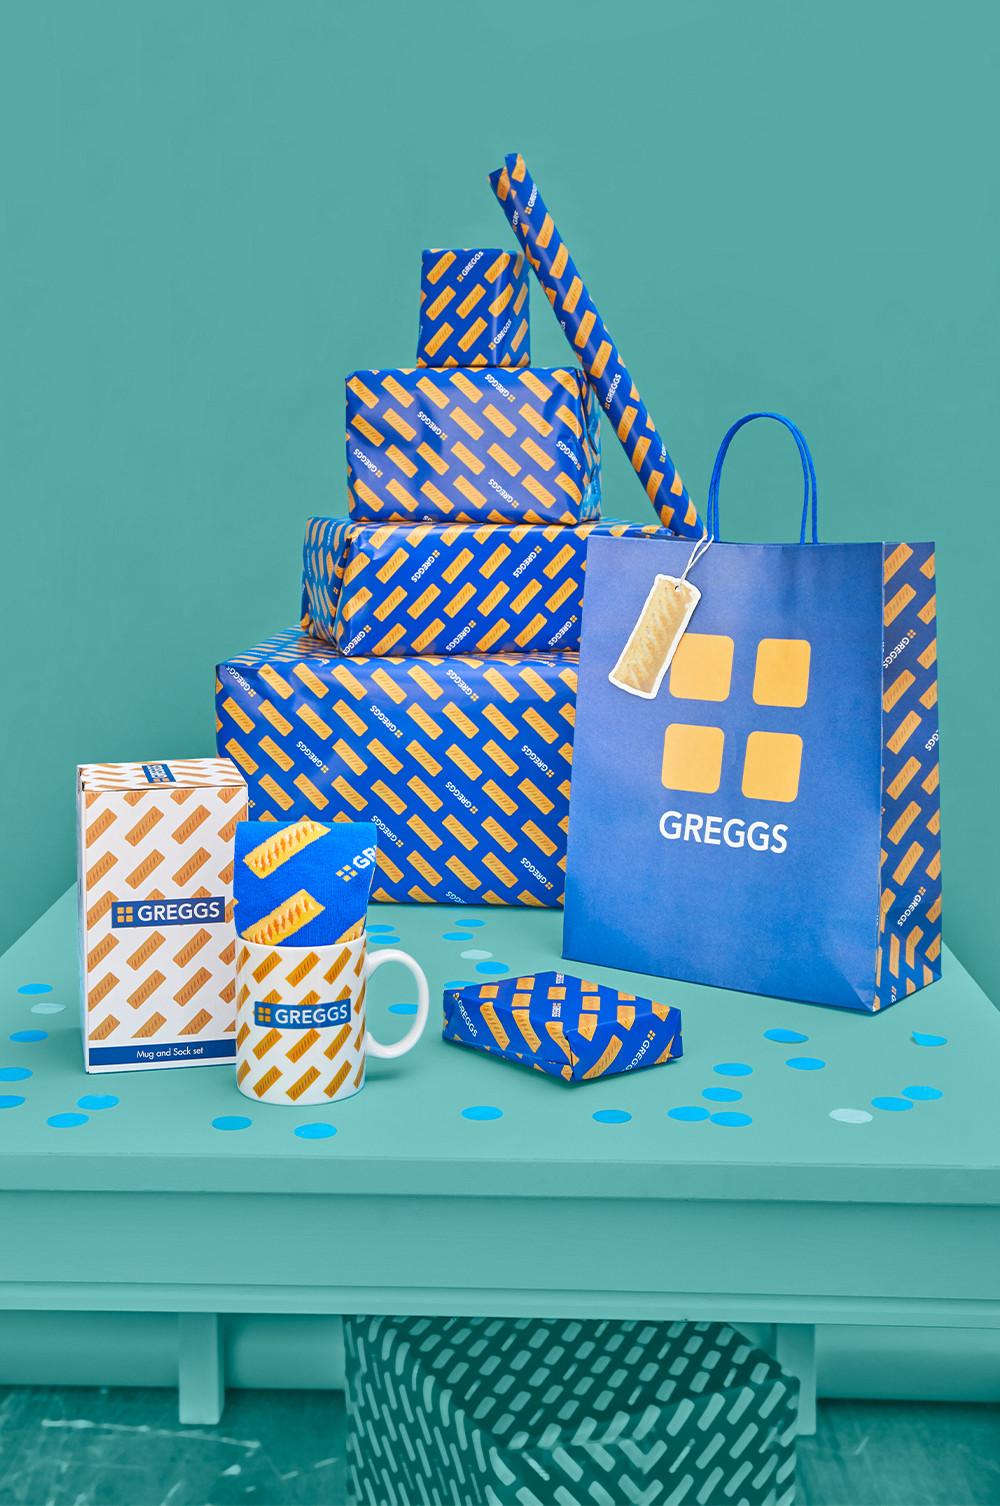 Greggs x Primark taps cult kitsch for social clout